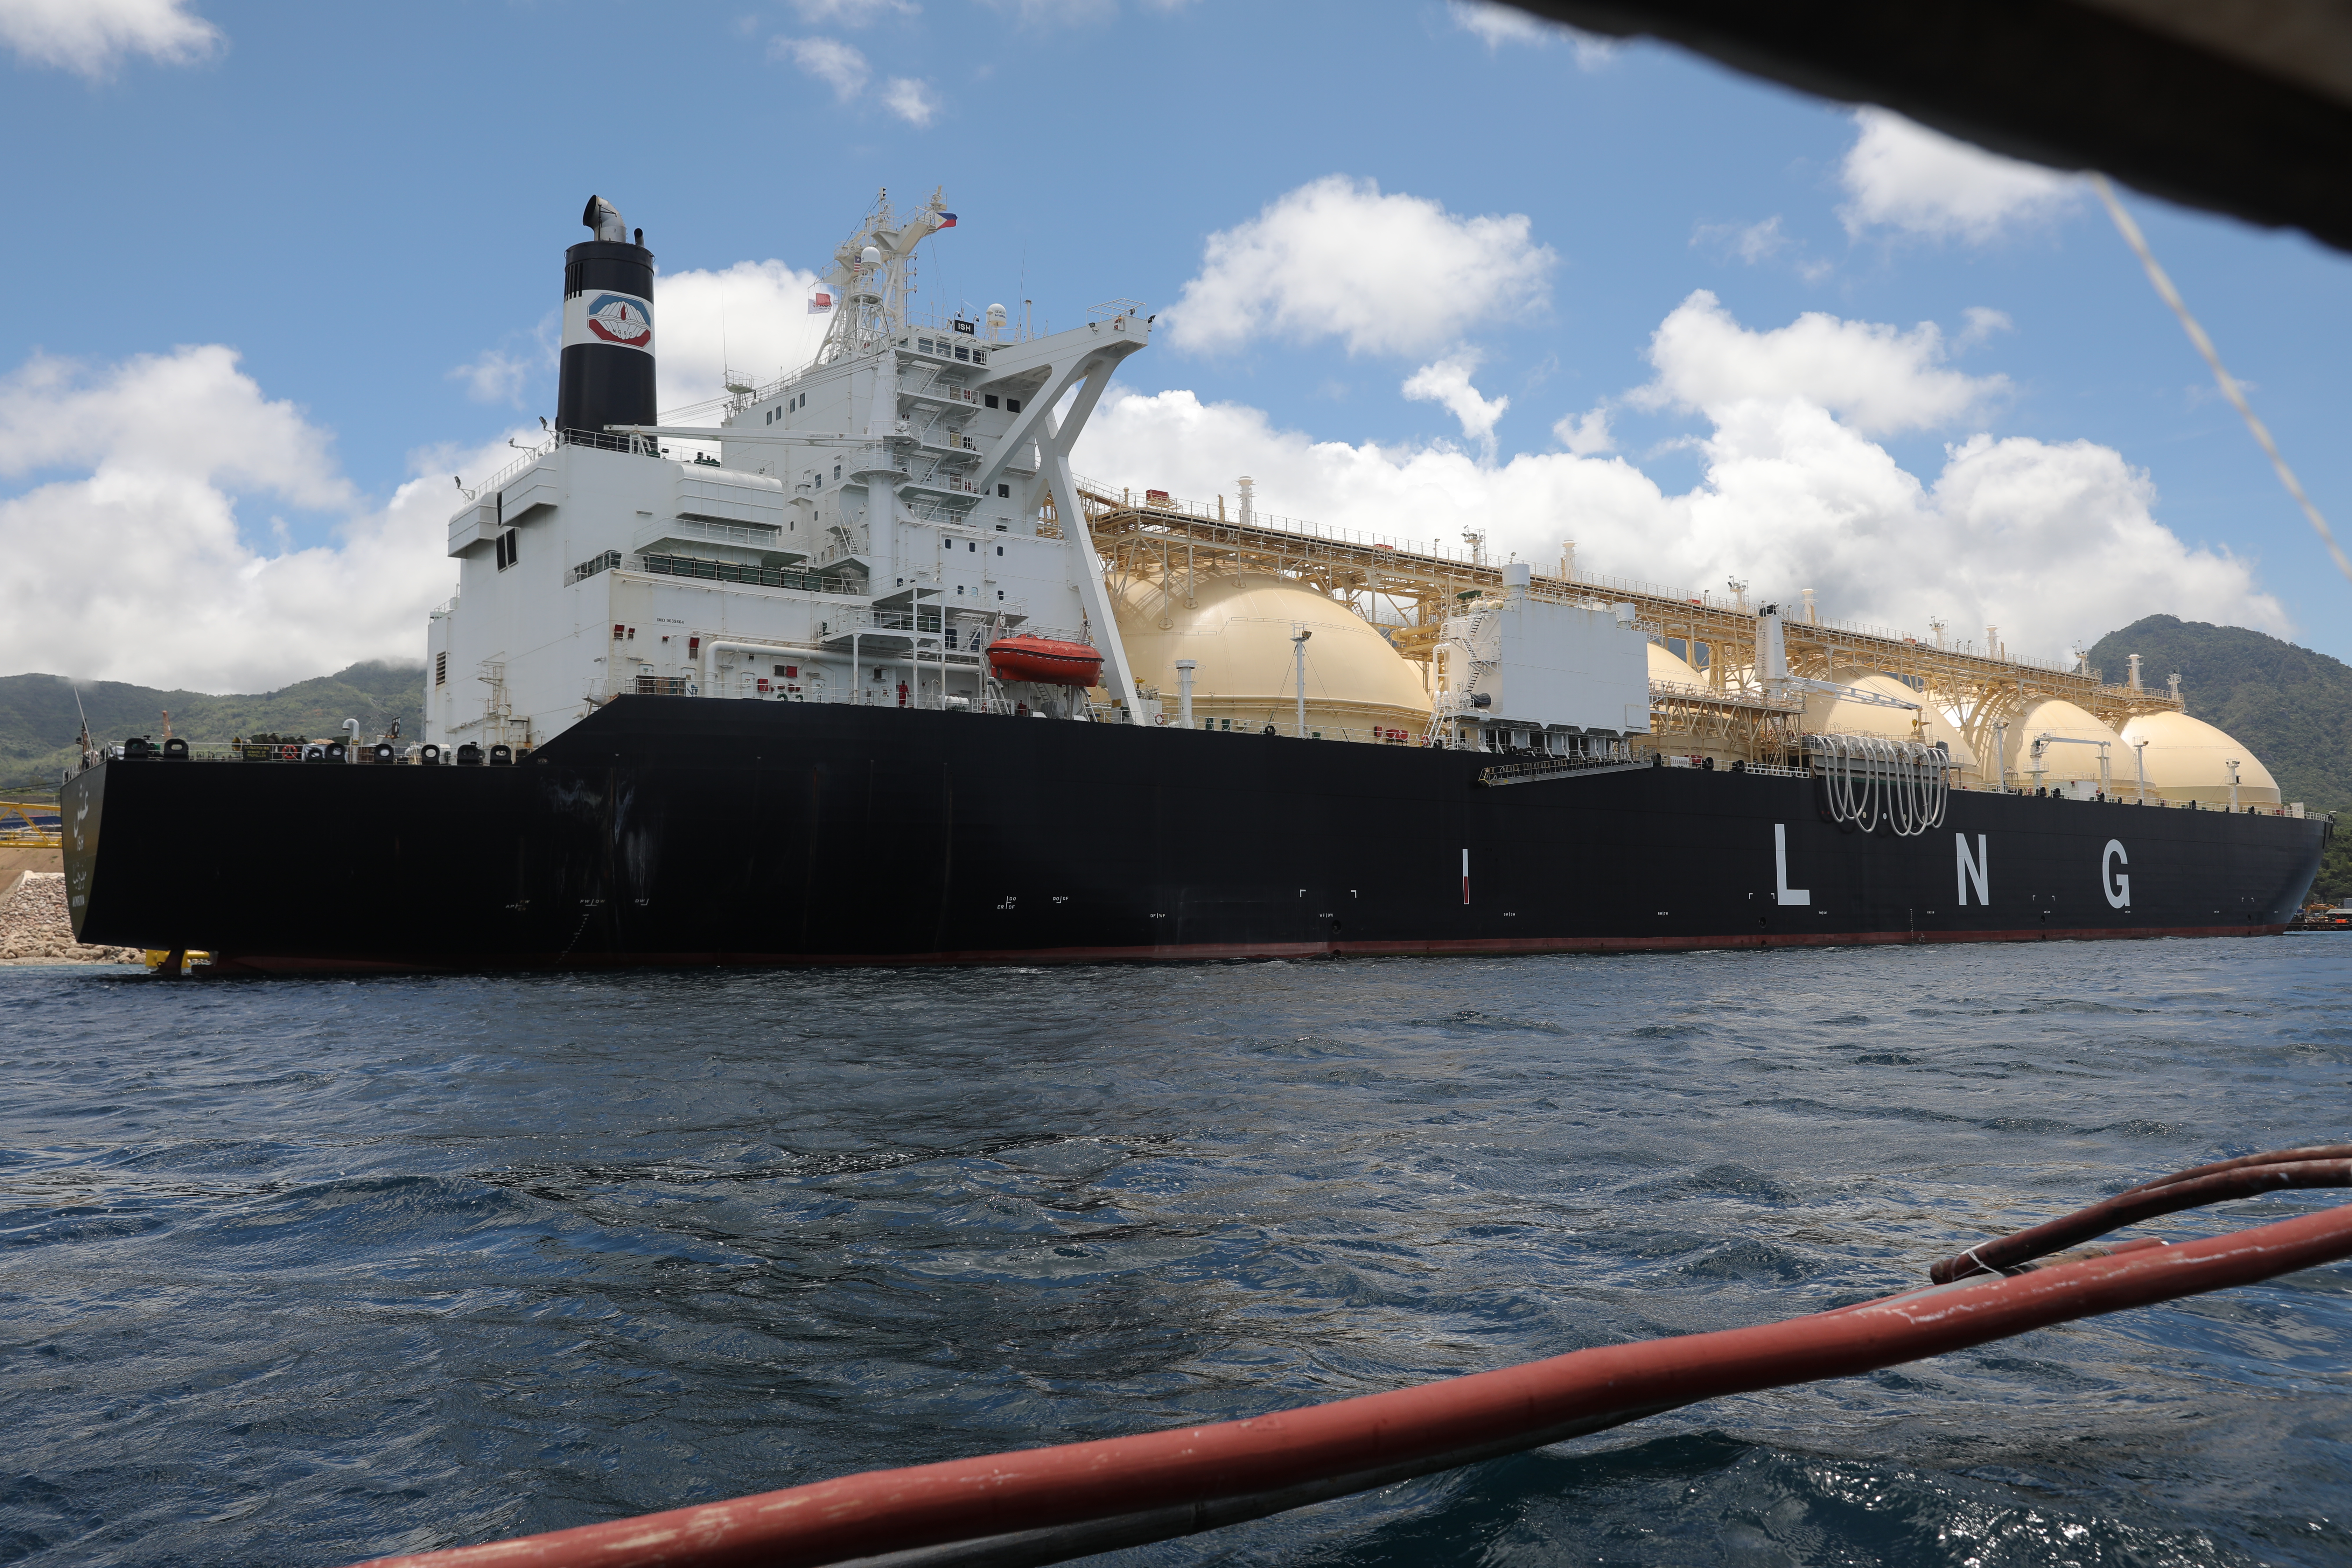 REPORT – LNG, SHIPPING, AND THE AMAZON OF THE OCEANS: Scoping Key Issues and Potential Impacts of the Massive Expansion of LNG in the Verde Island Passage